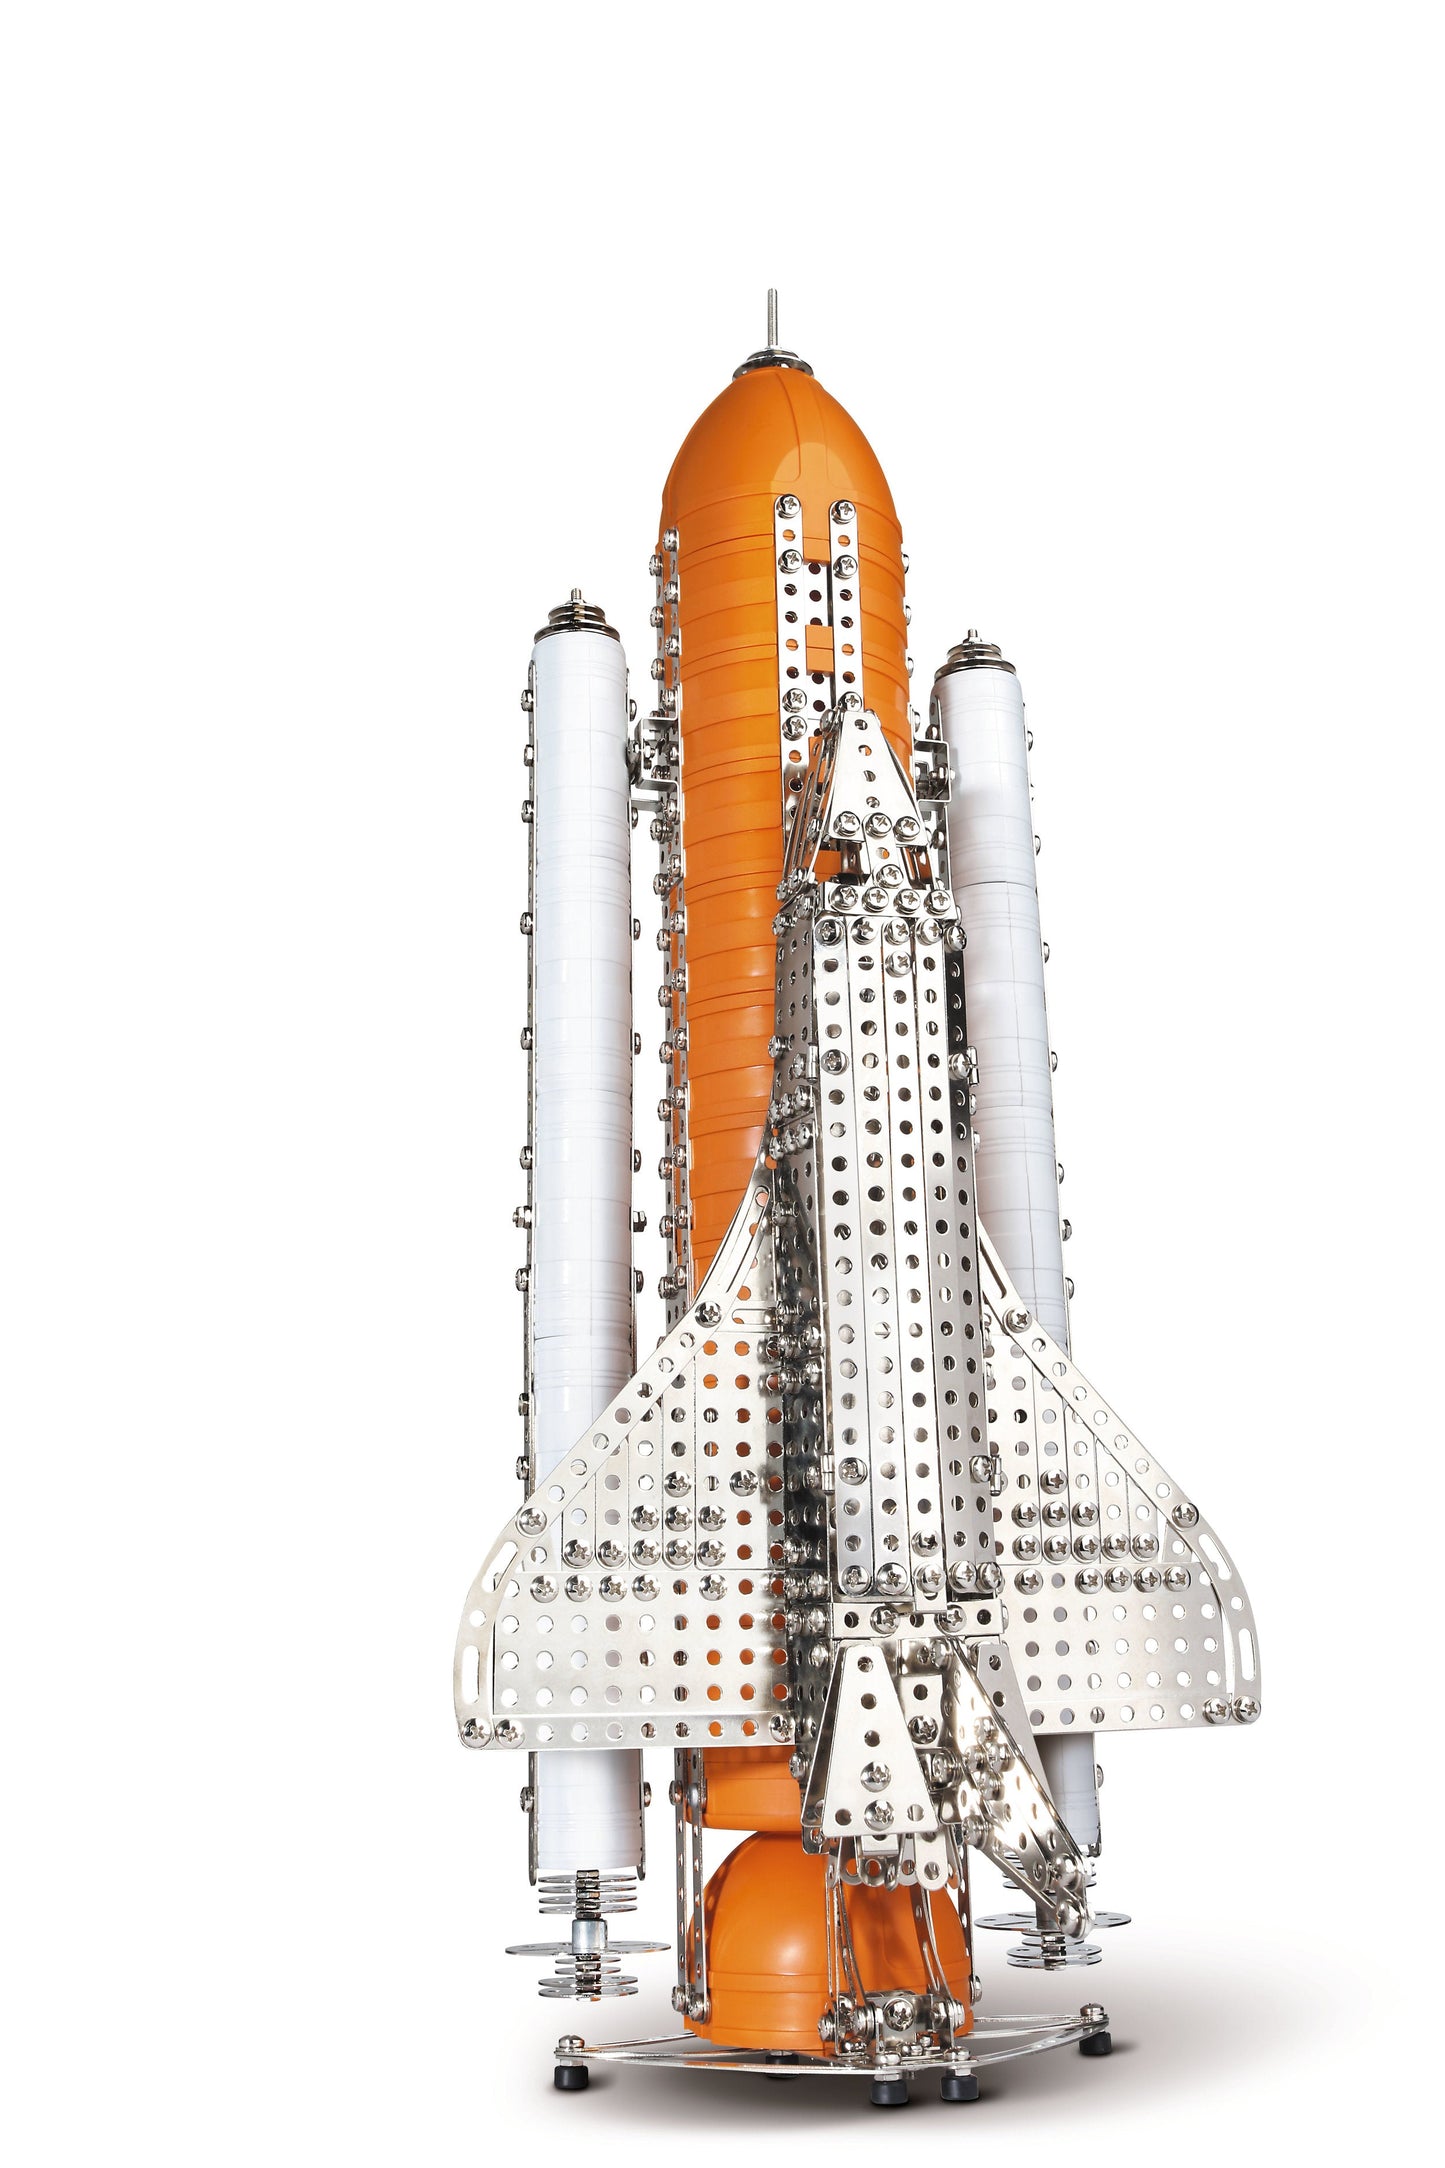 Eitech Exclusive Series Deluxe Space Shuttle